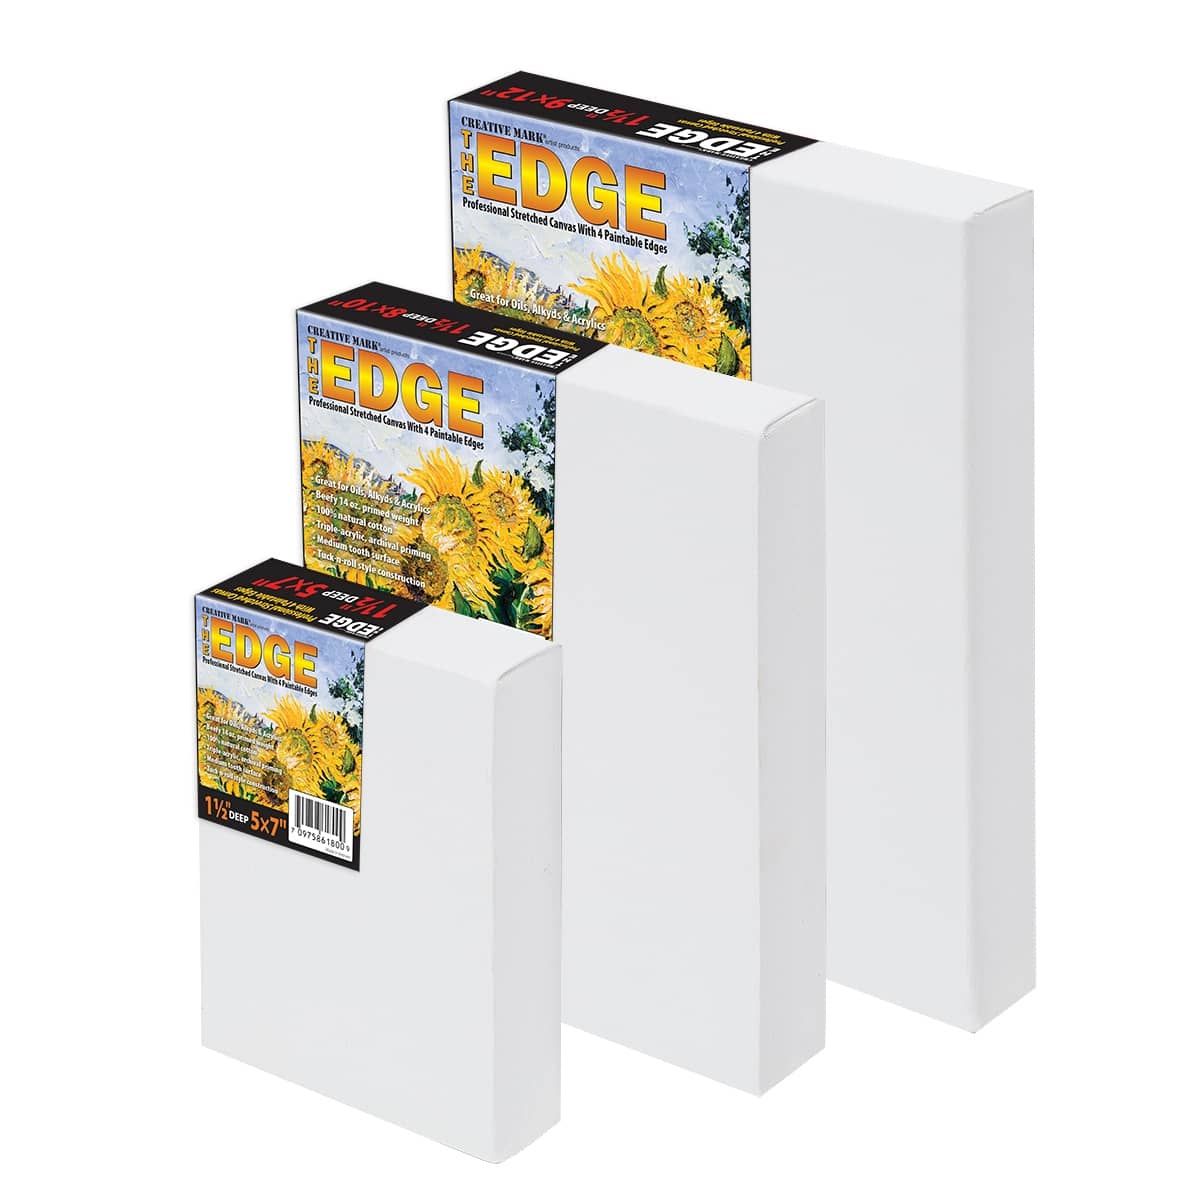 The Edge All Media 1-1/2” Deep Singles, Boxes of 3 & Packs of 9